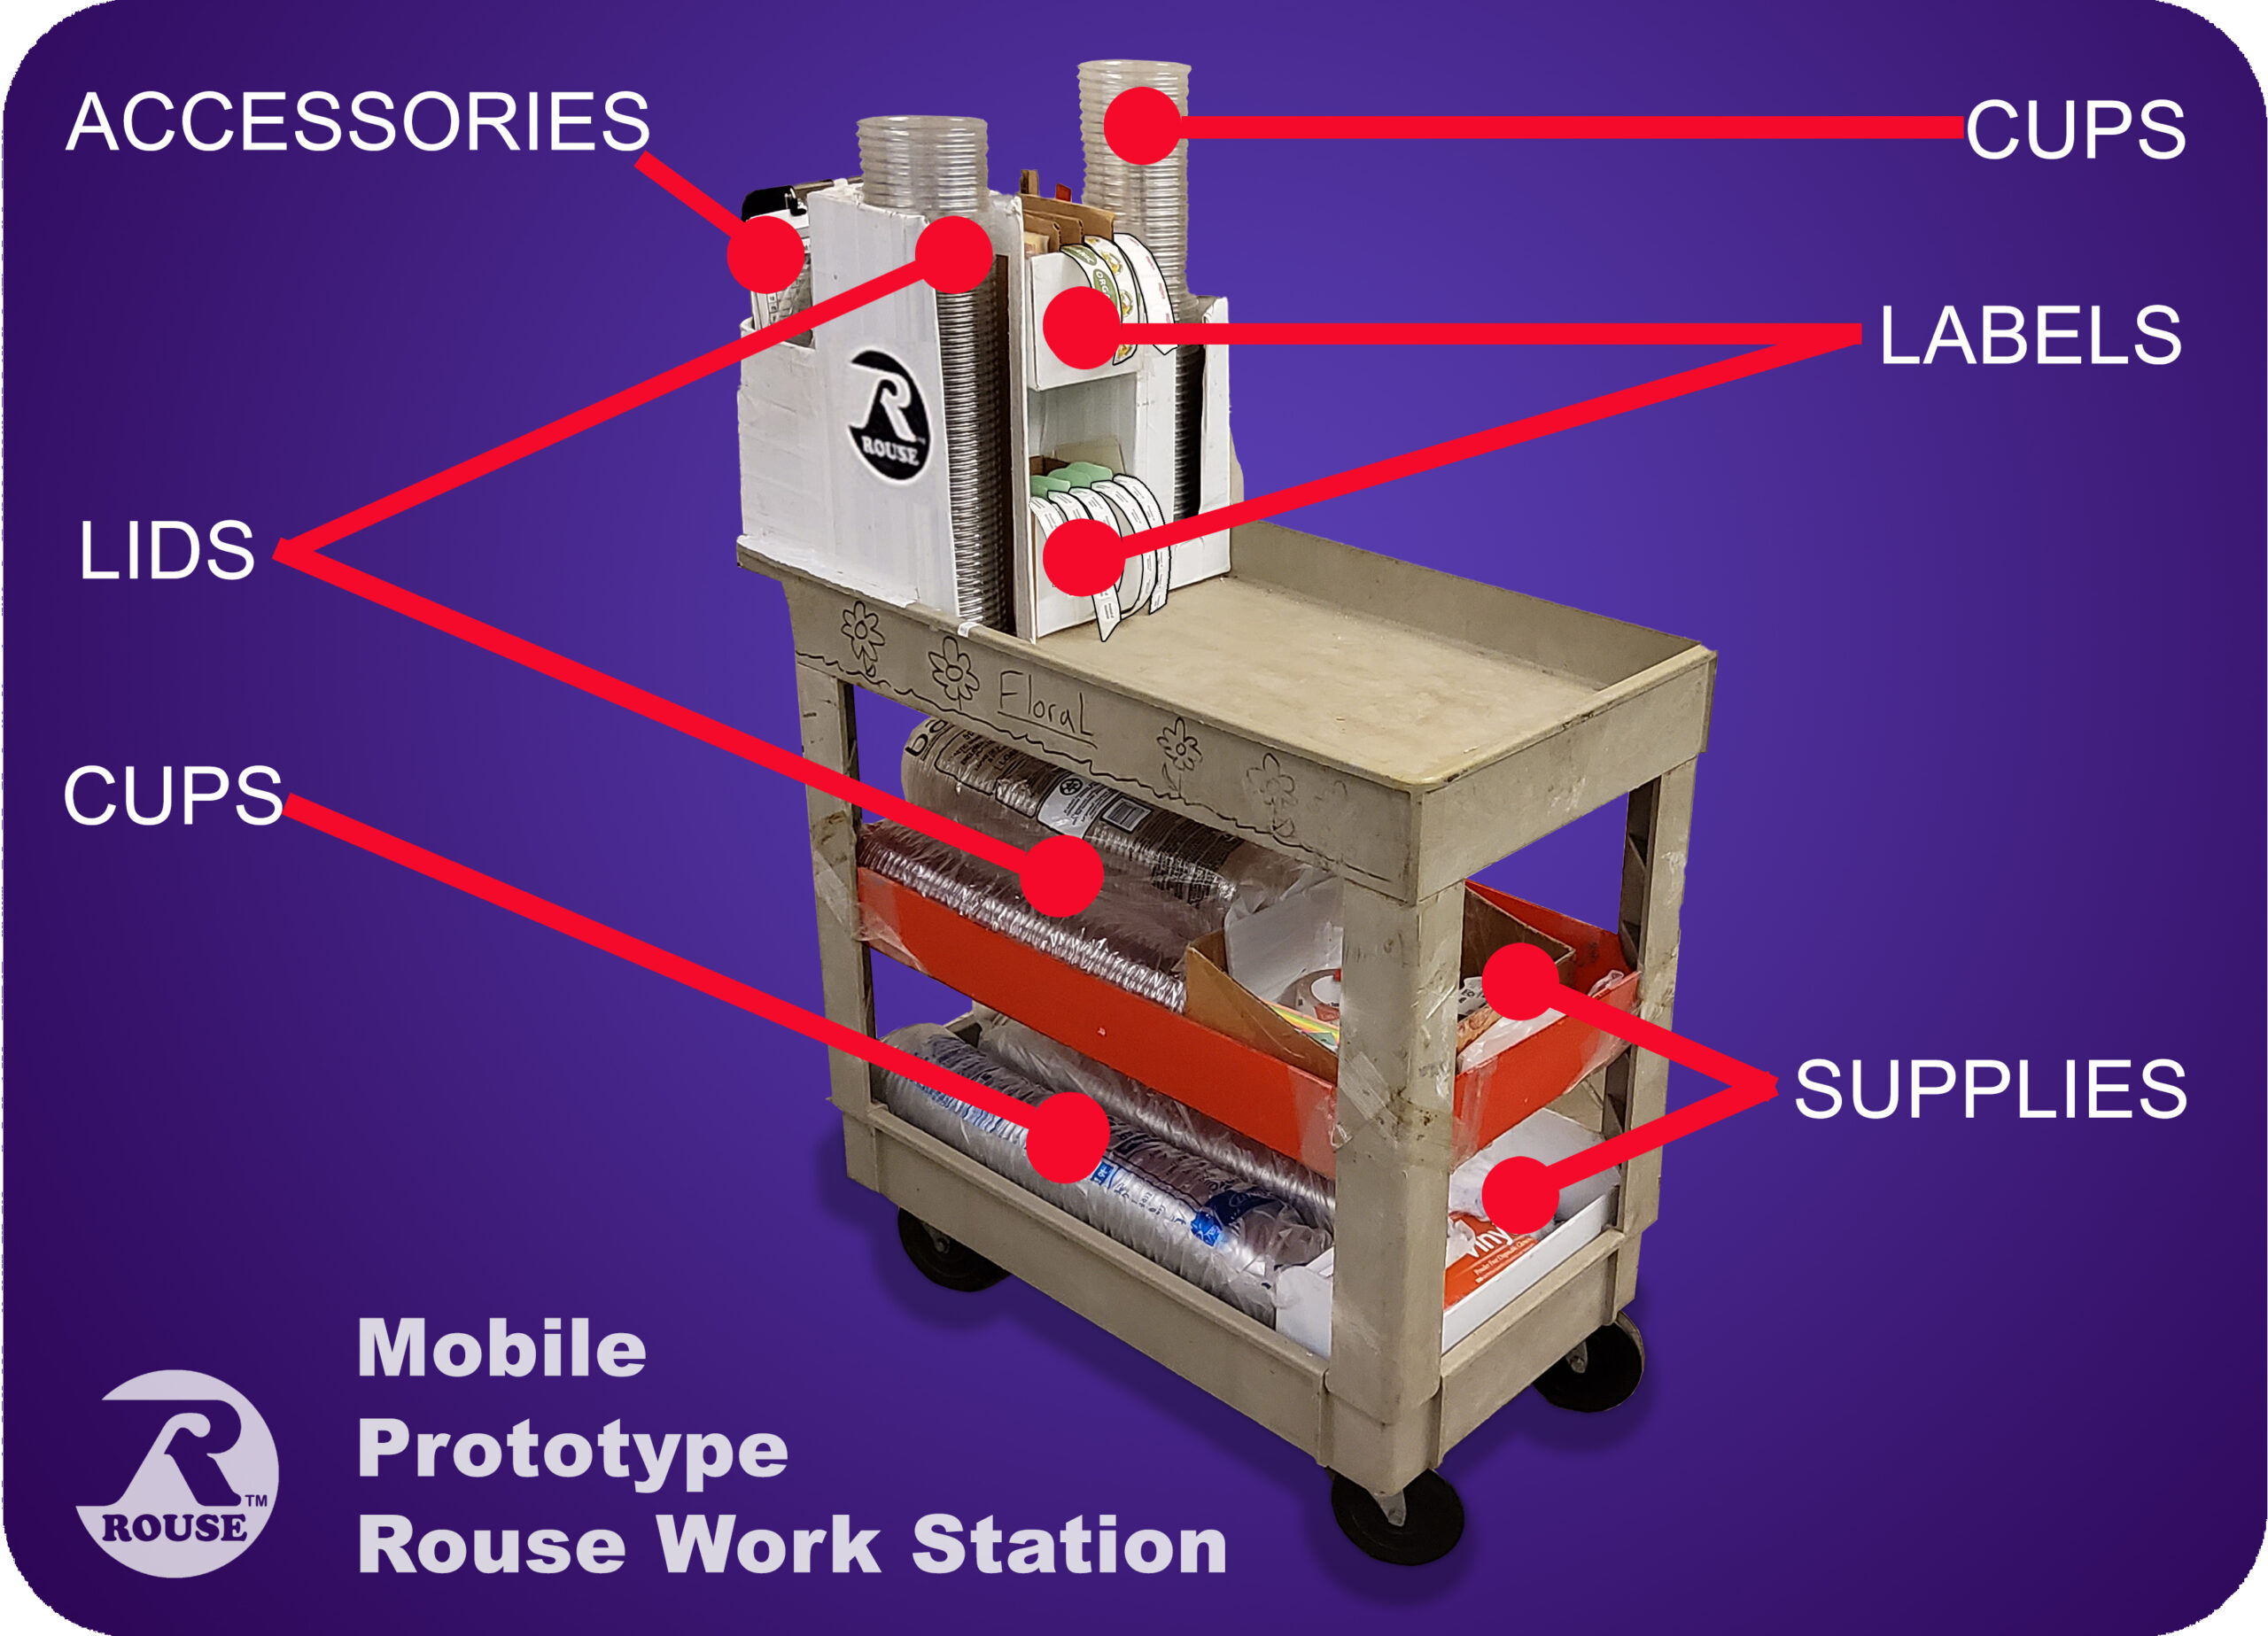 Mobile Prototype Rouse Work Station